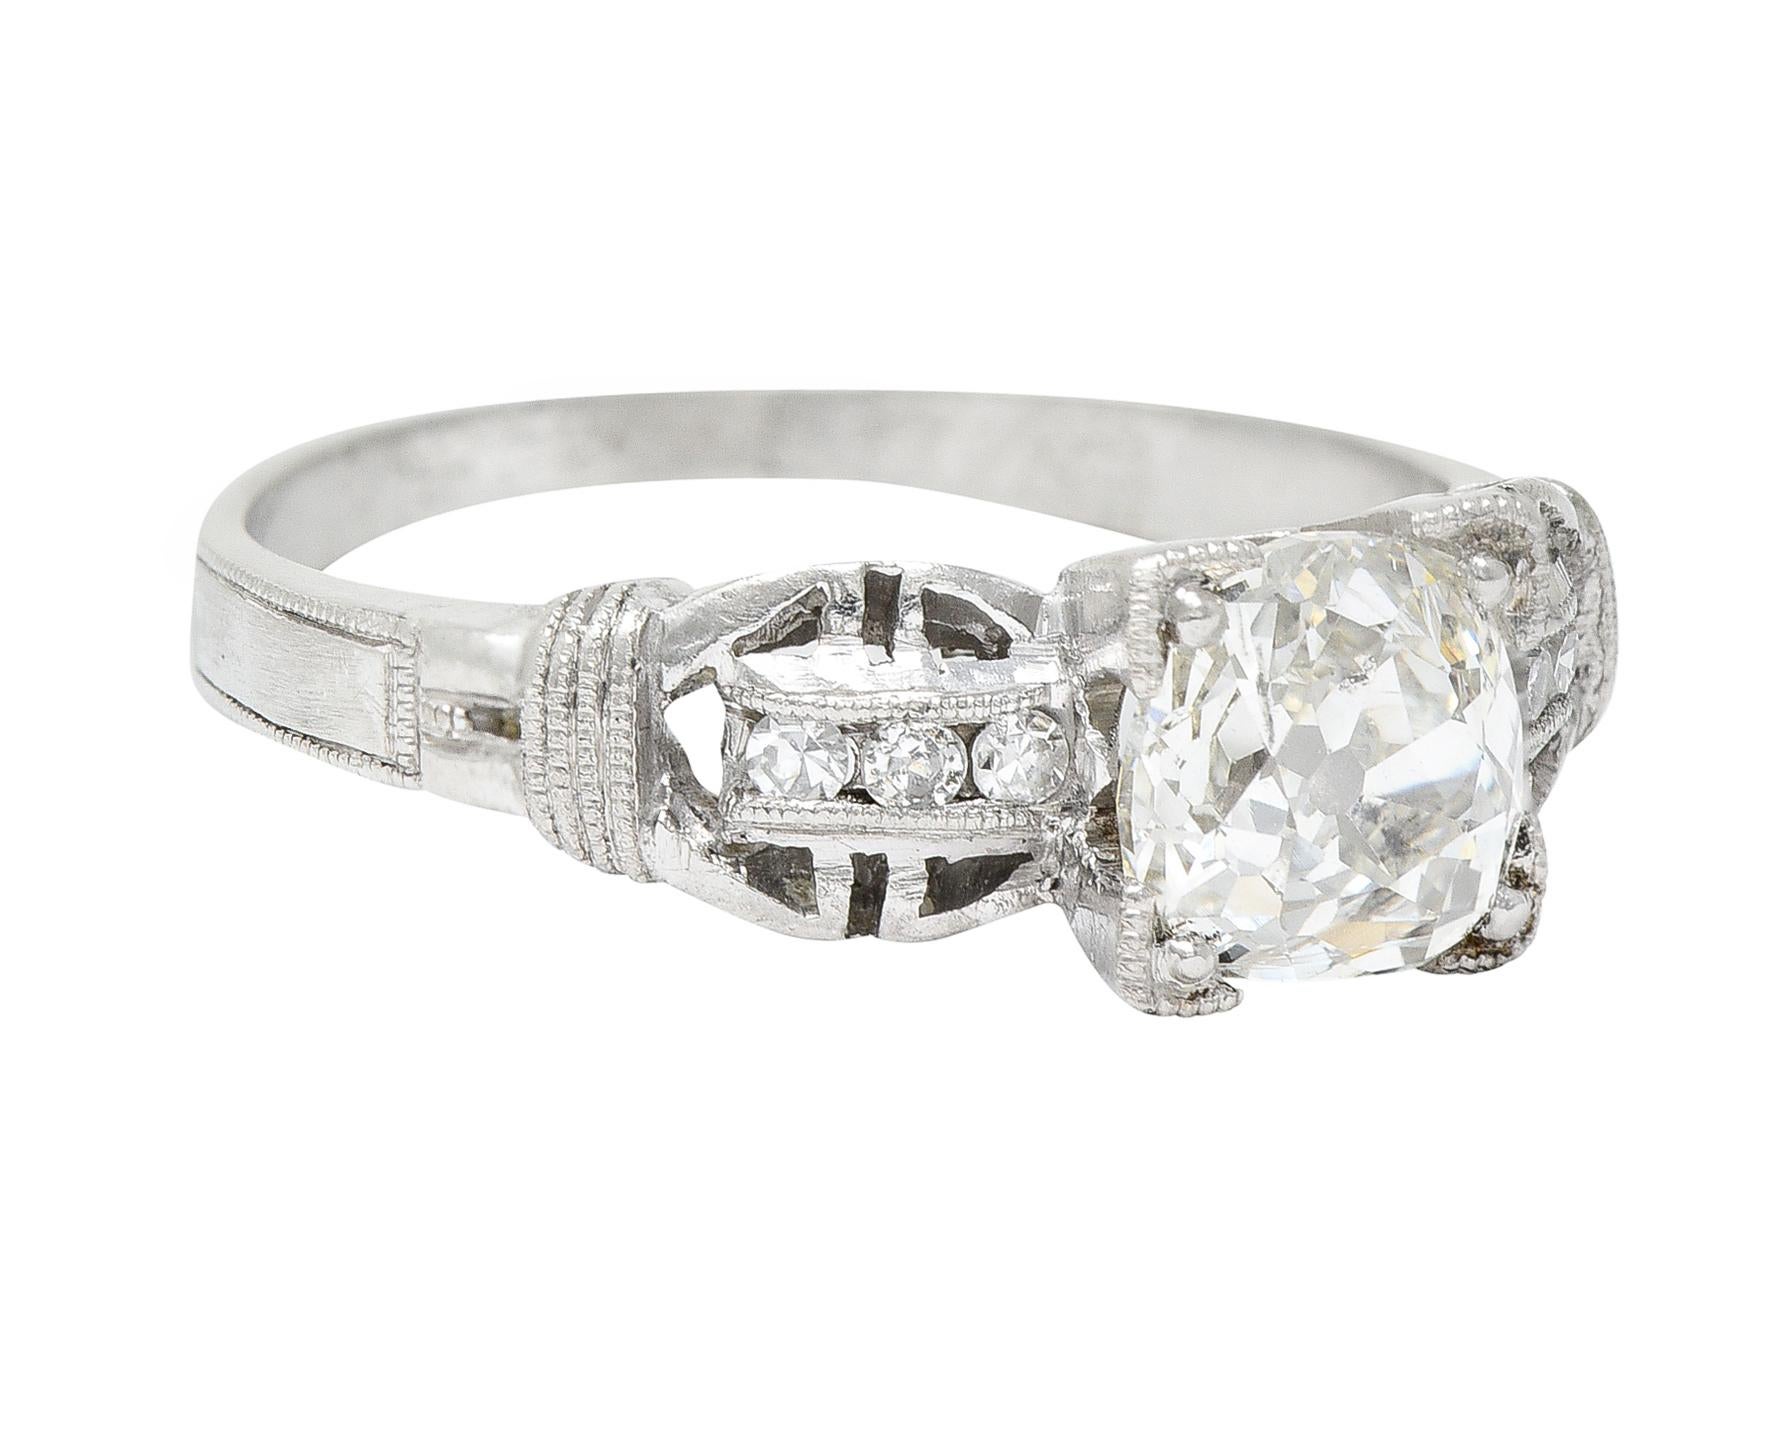 Featuring an old mine cut diamond weighing 1.06 carats - J color with SI2 clarity

Set in a stylized square form head and flanked by buckle motif shoulders

Accented by single cut diamonds weighing approximately 0.10 carat - eye clean and